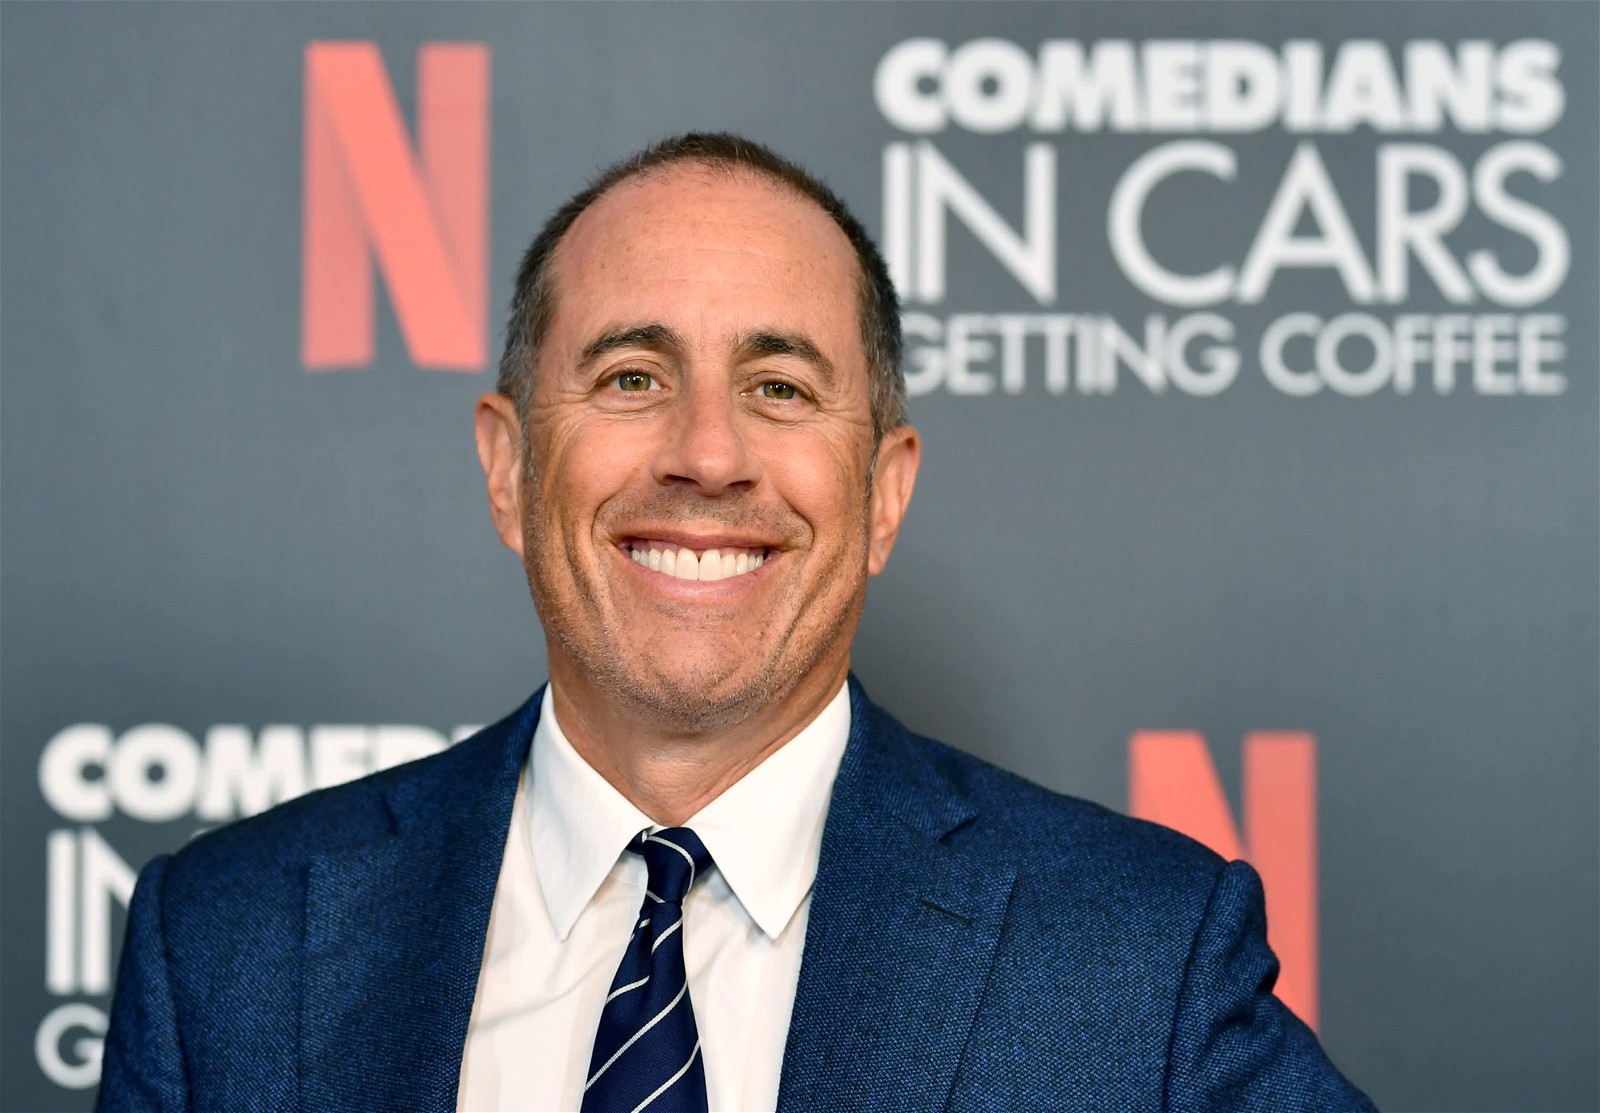 Jerry Seinfeld opens up about why he would never create another show like Seinfeld